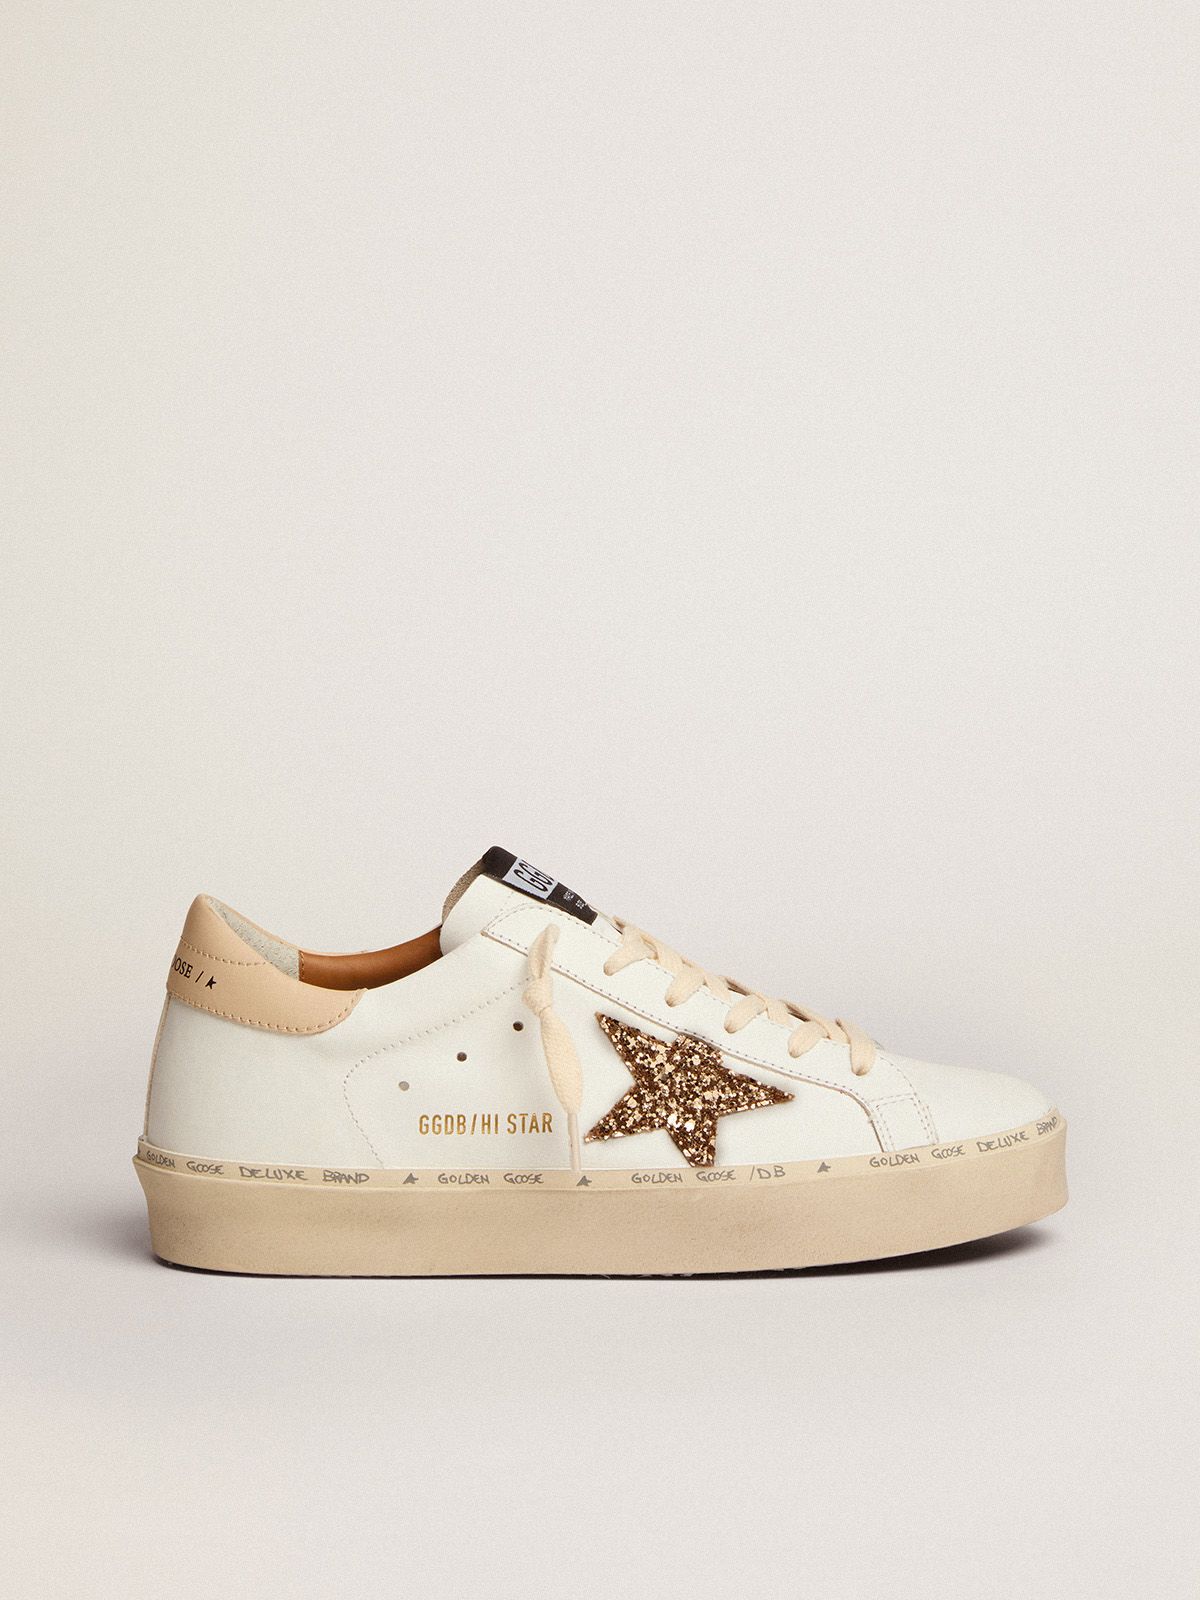 golden goose sneakers glitter tab heel with and beige leather gold Star Hi star